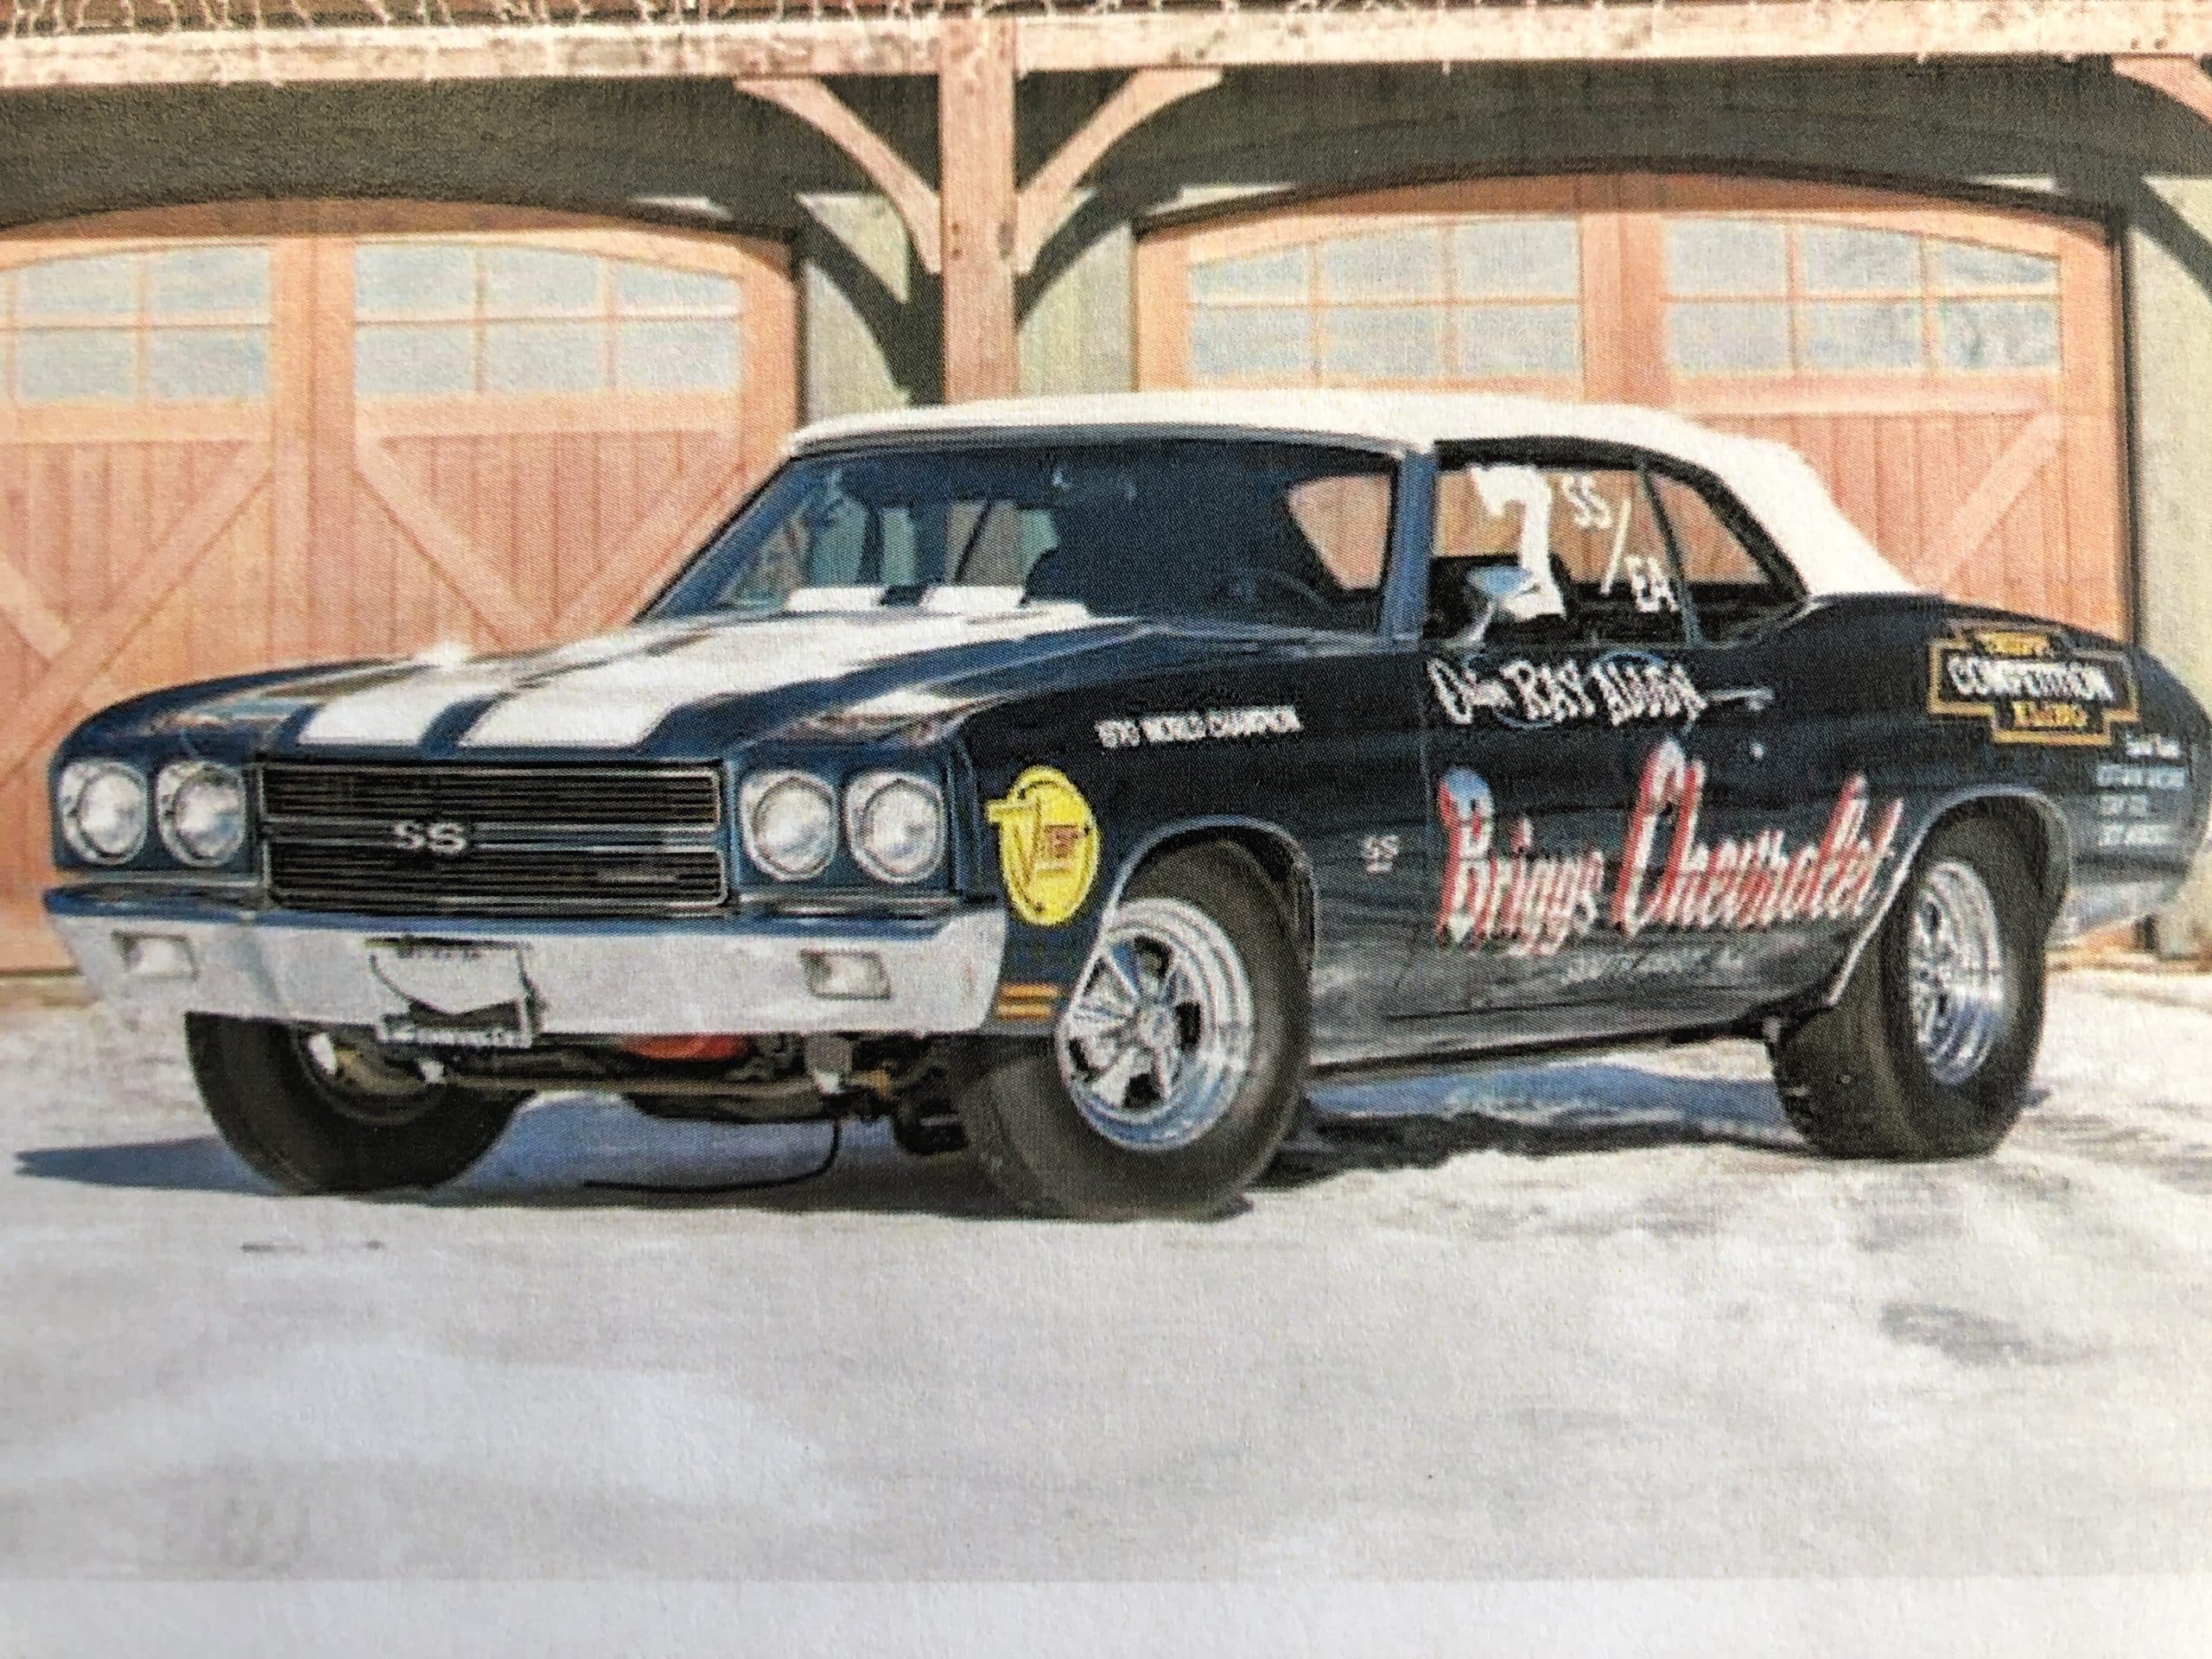 The Ray Allen Super Stock Chevelle Was A Game Changer. It Brought Added Prestige And Value To All Muscle Cars. (Photo By Mecum Auctions)